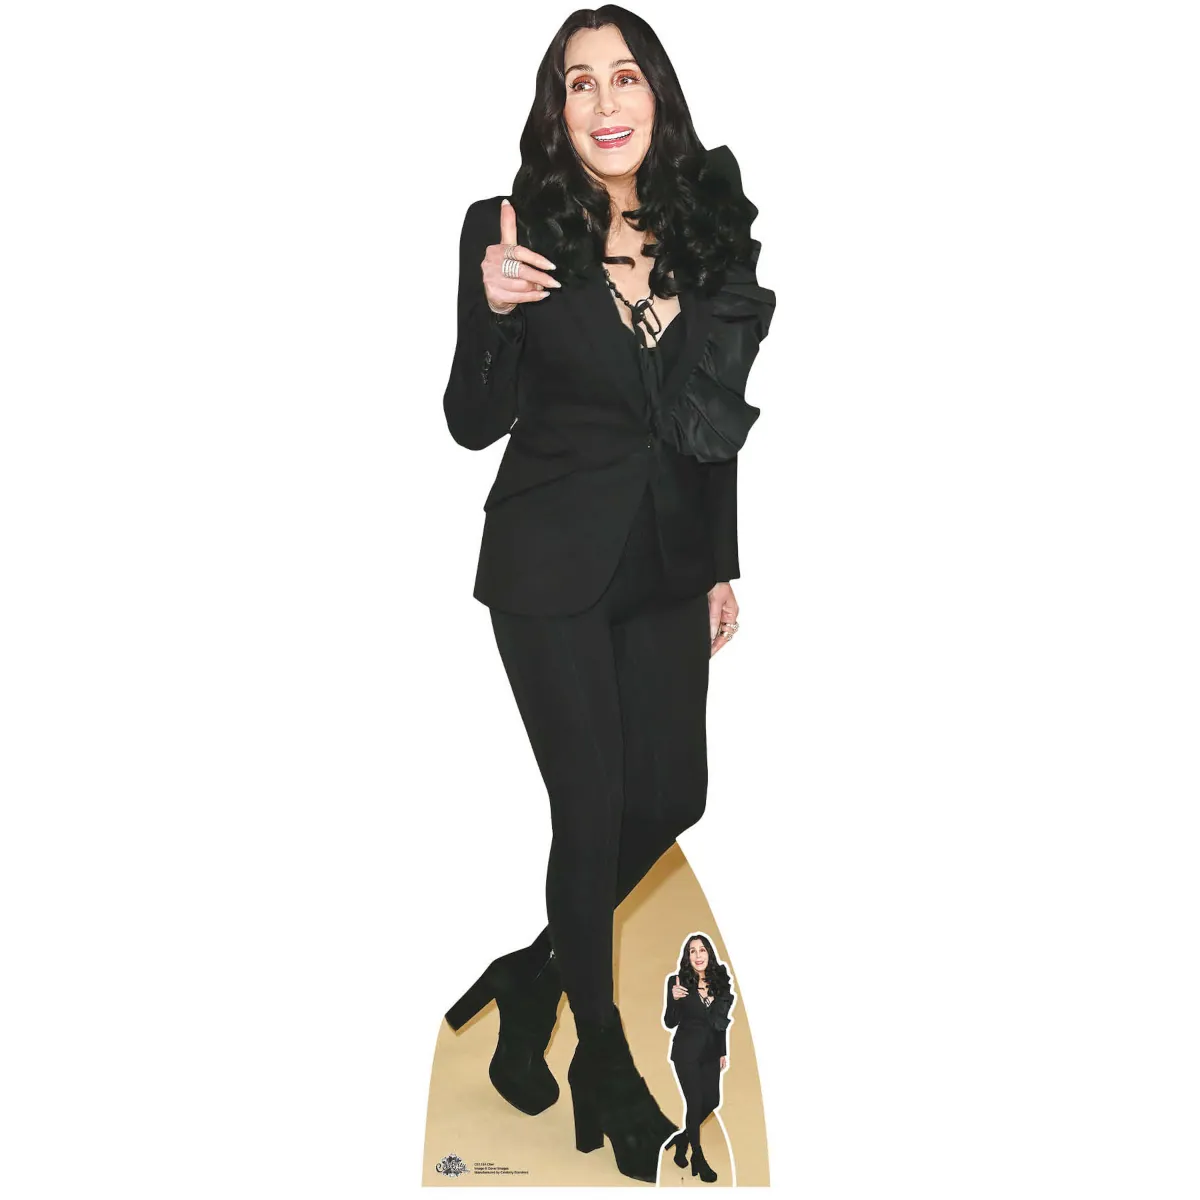 CS1184 Cher 'Thumbs Up' (American Singer) Lifesize + Mini Cardboard Cutout Standee Front